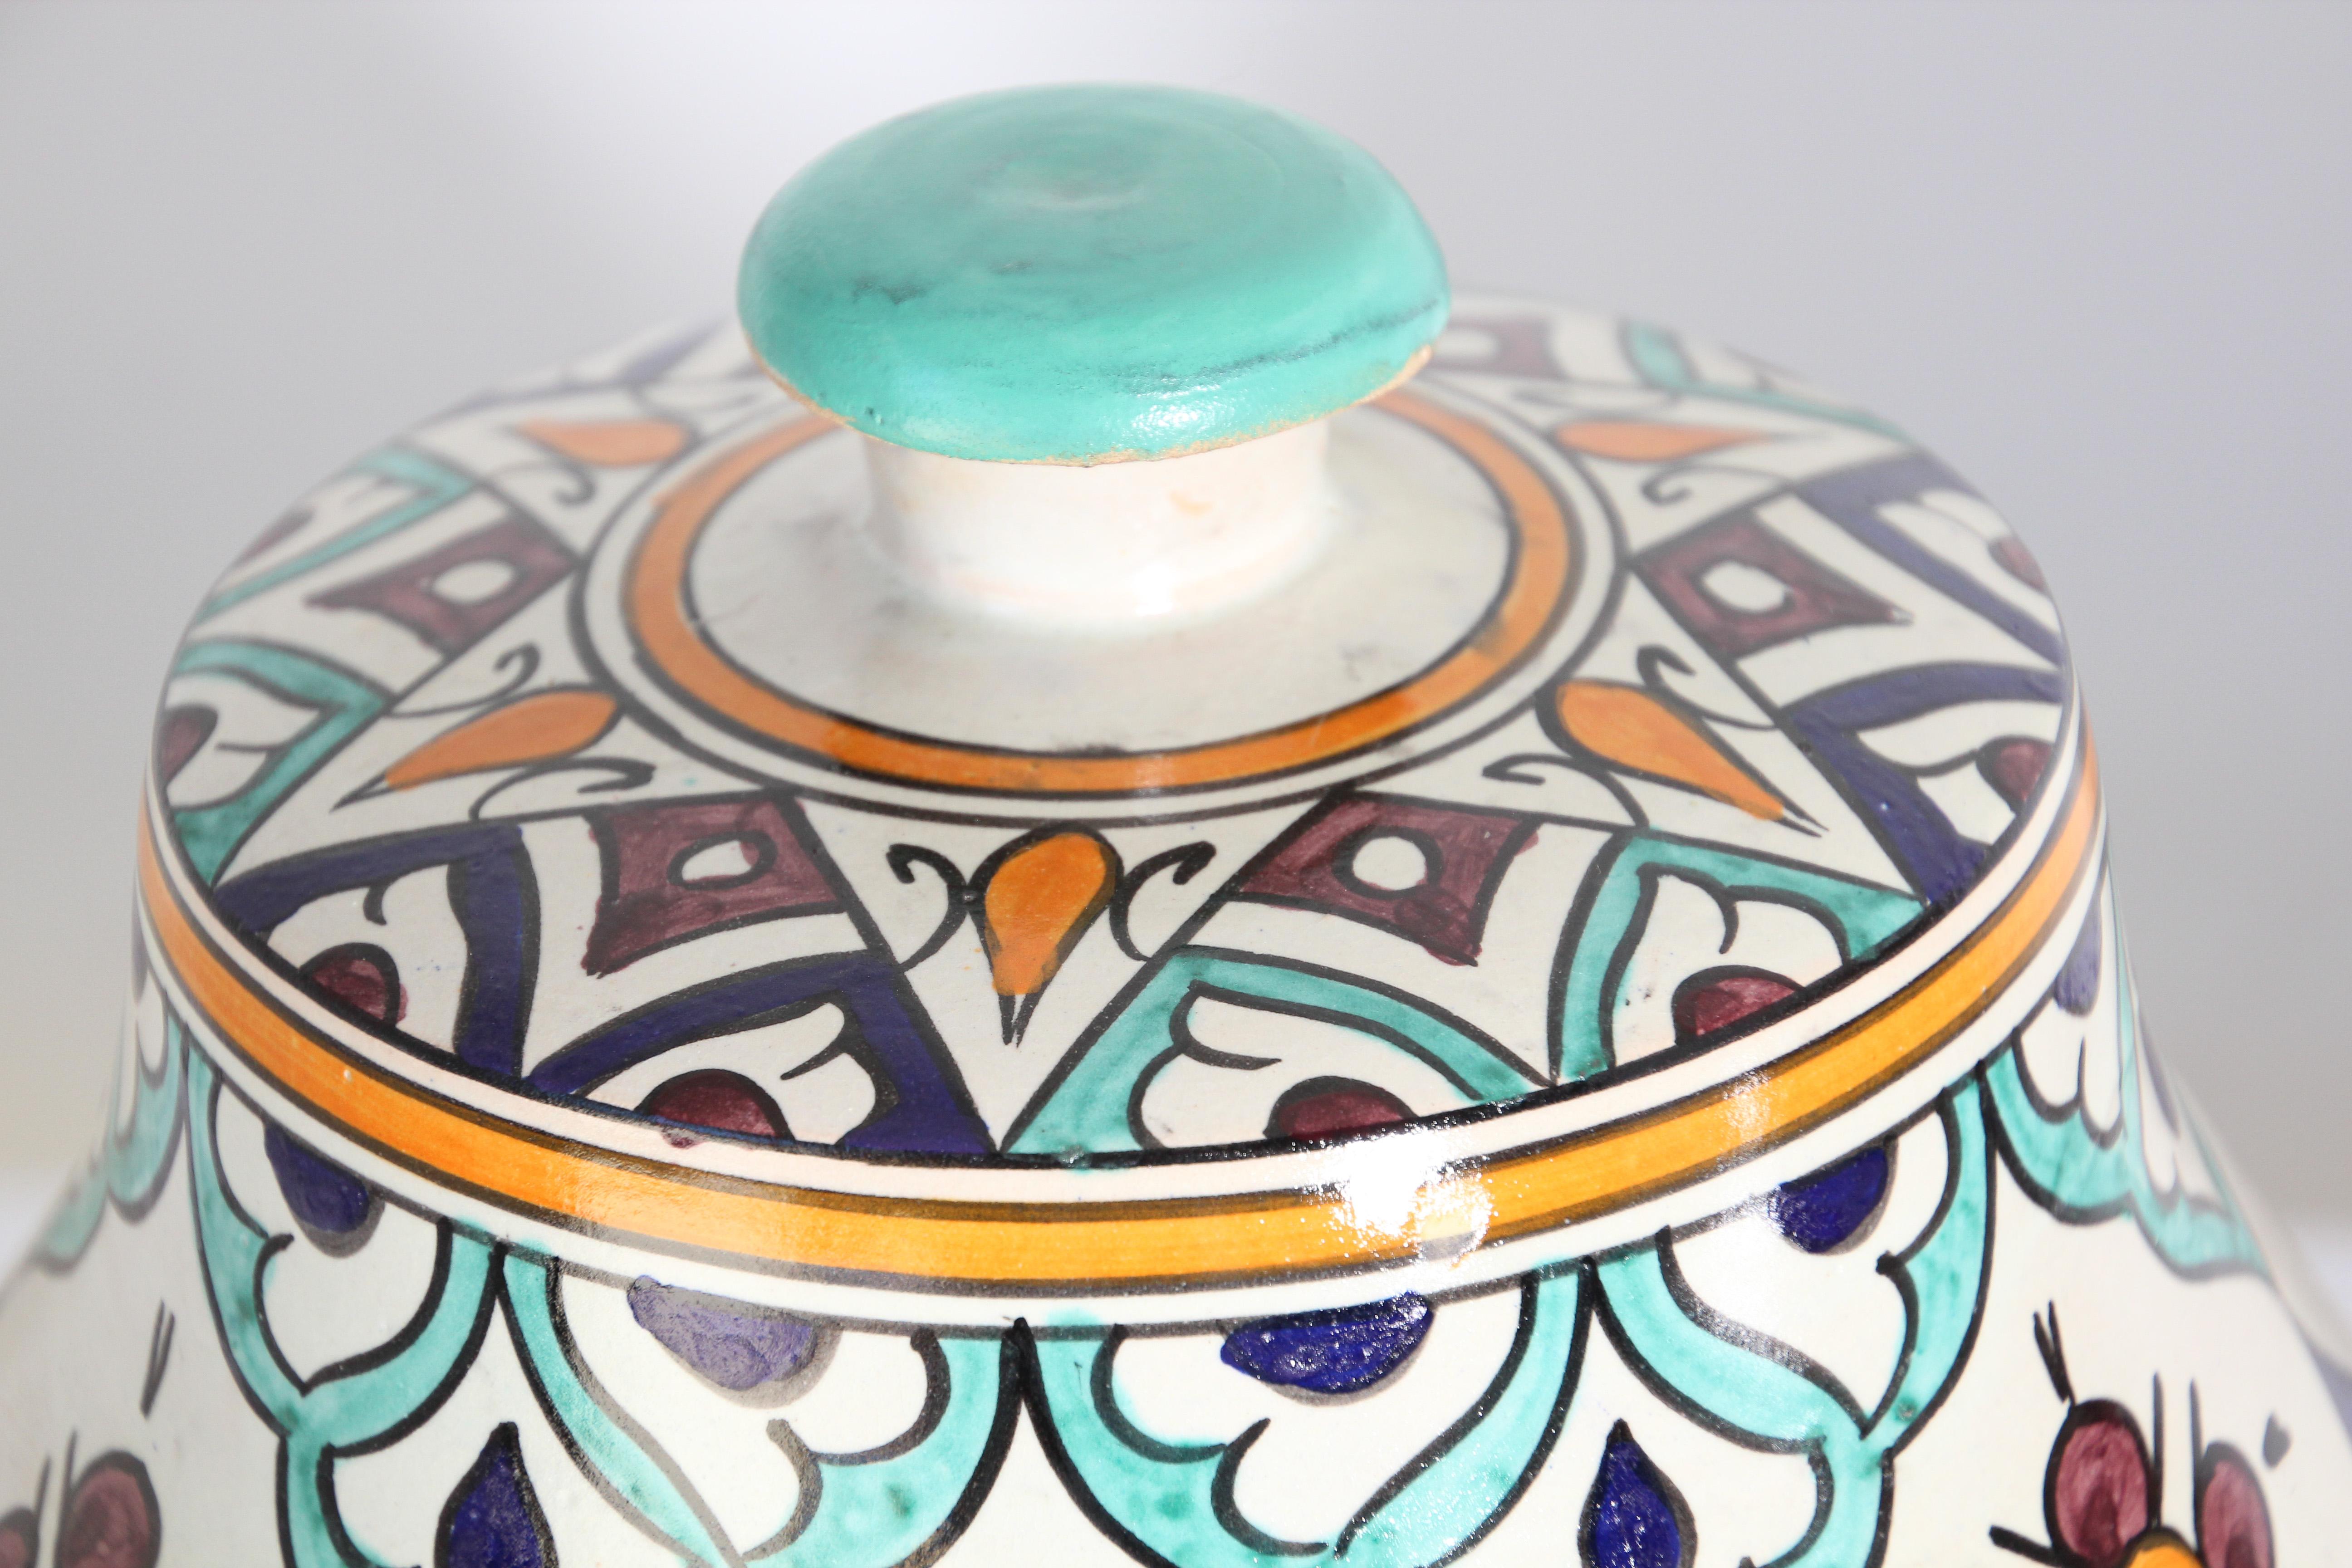 Moorish Ceramic Glazed Covered Urns Handcrafted in Fez Morocco For Sale 7